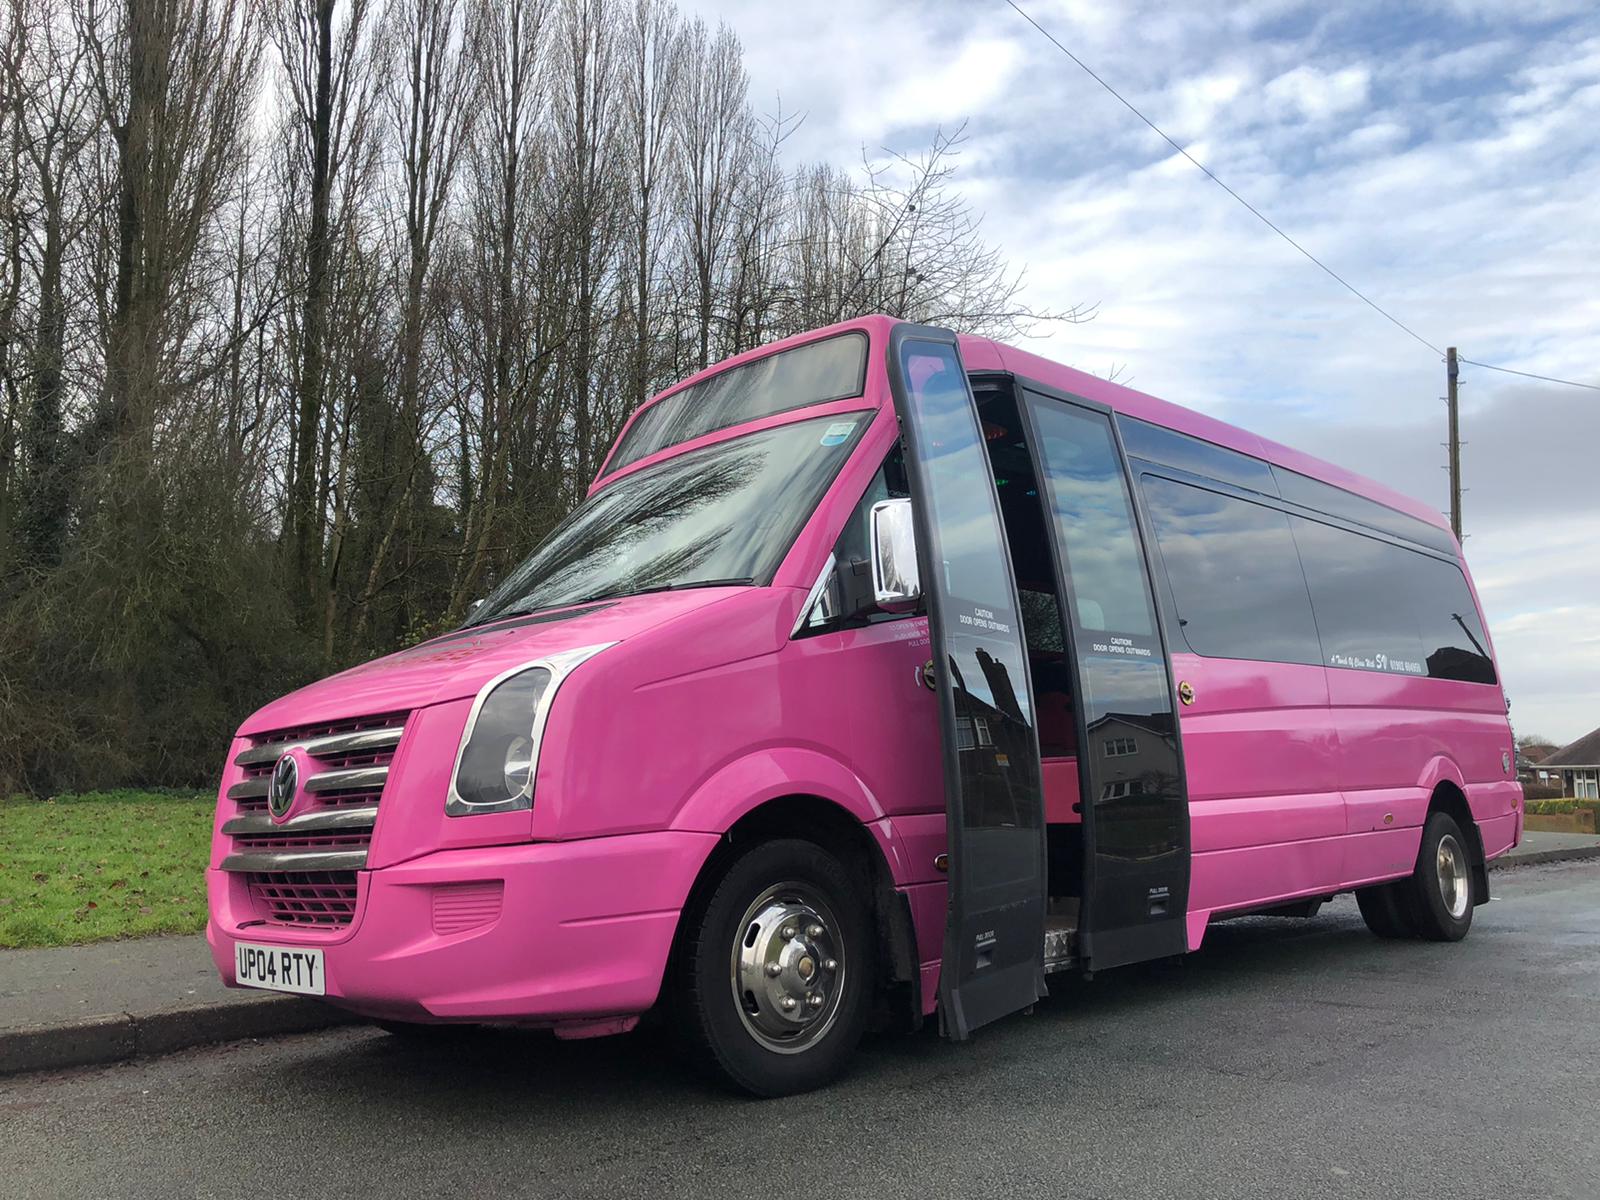 Top Hen Party Themes for a Fabulous UK Tour: Party Bus Edition